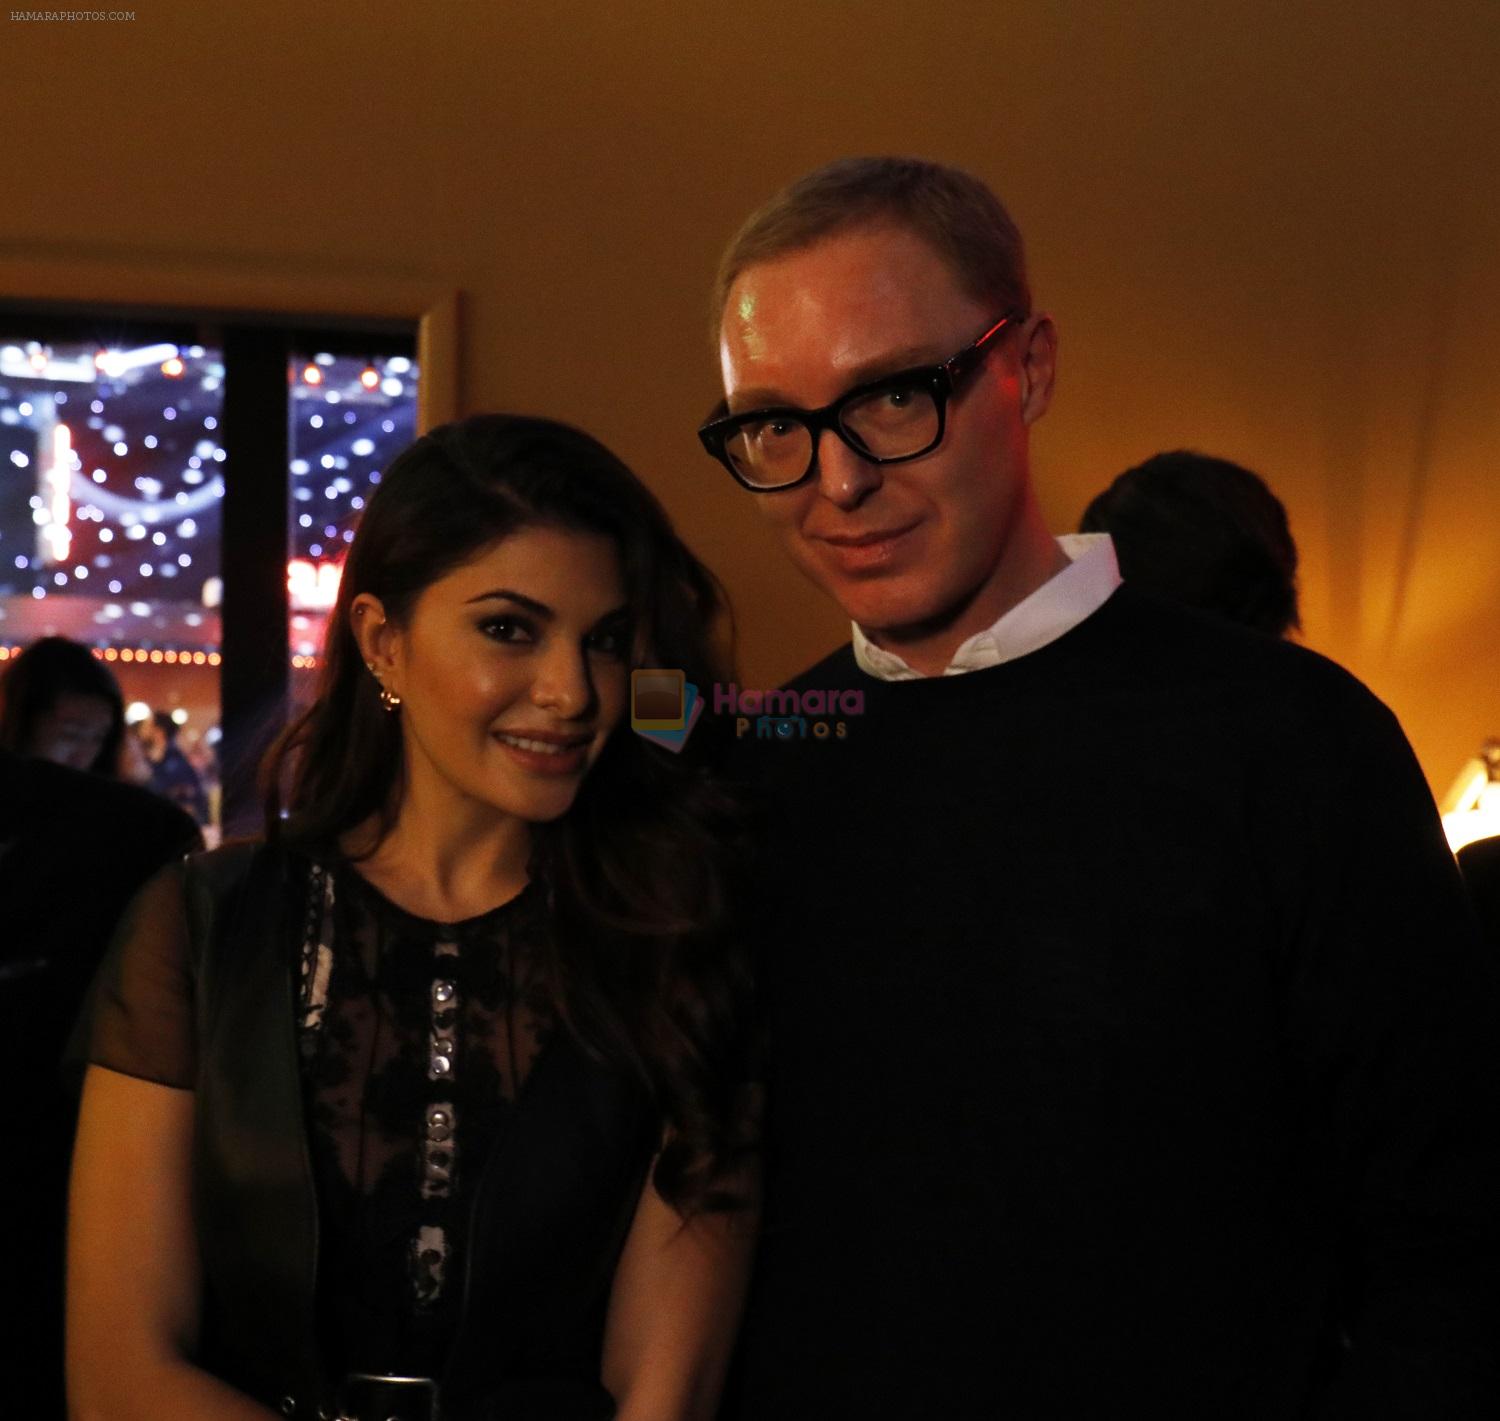 Jacqueline at Coach show in NY